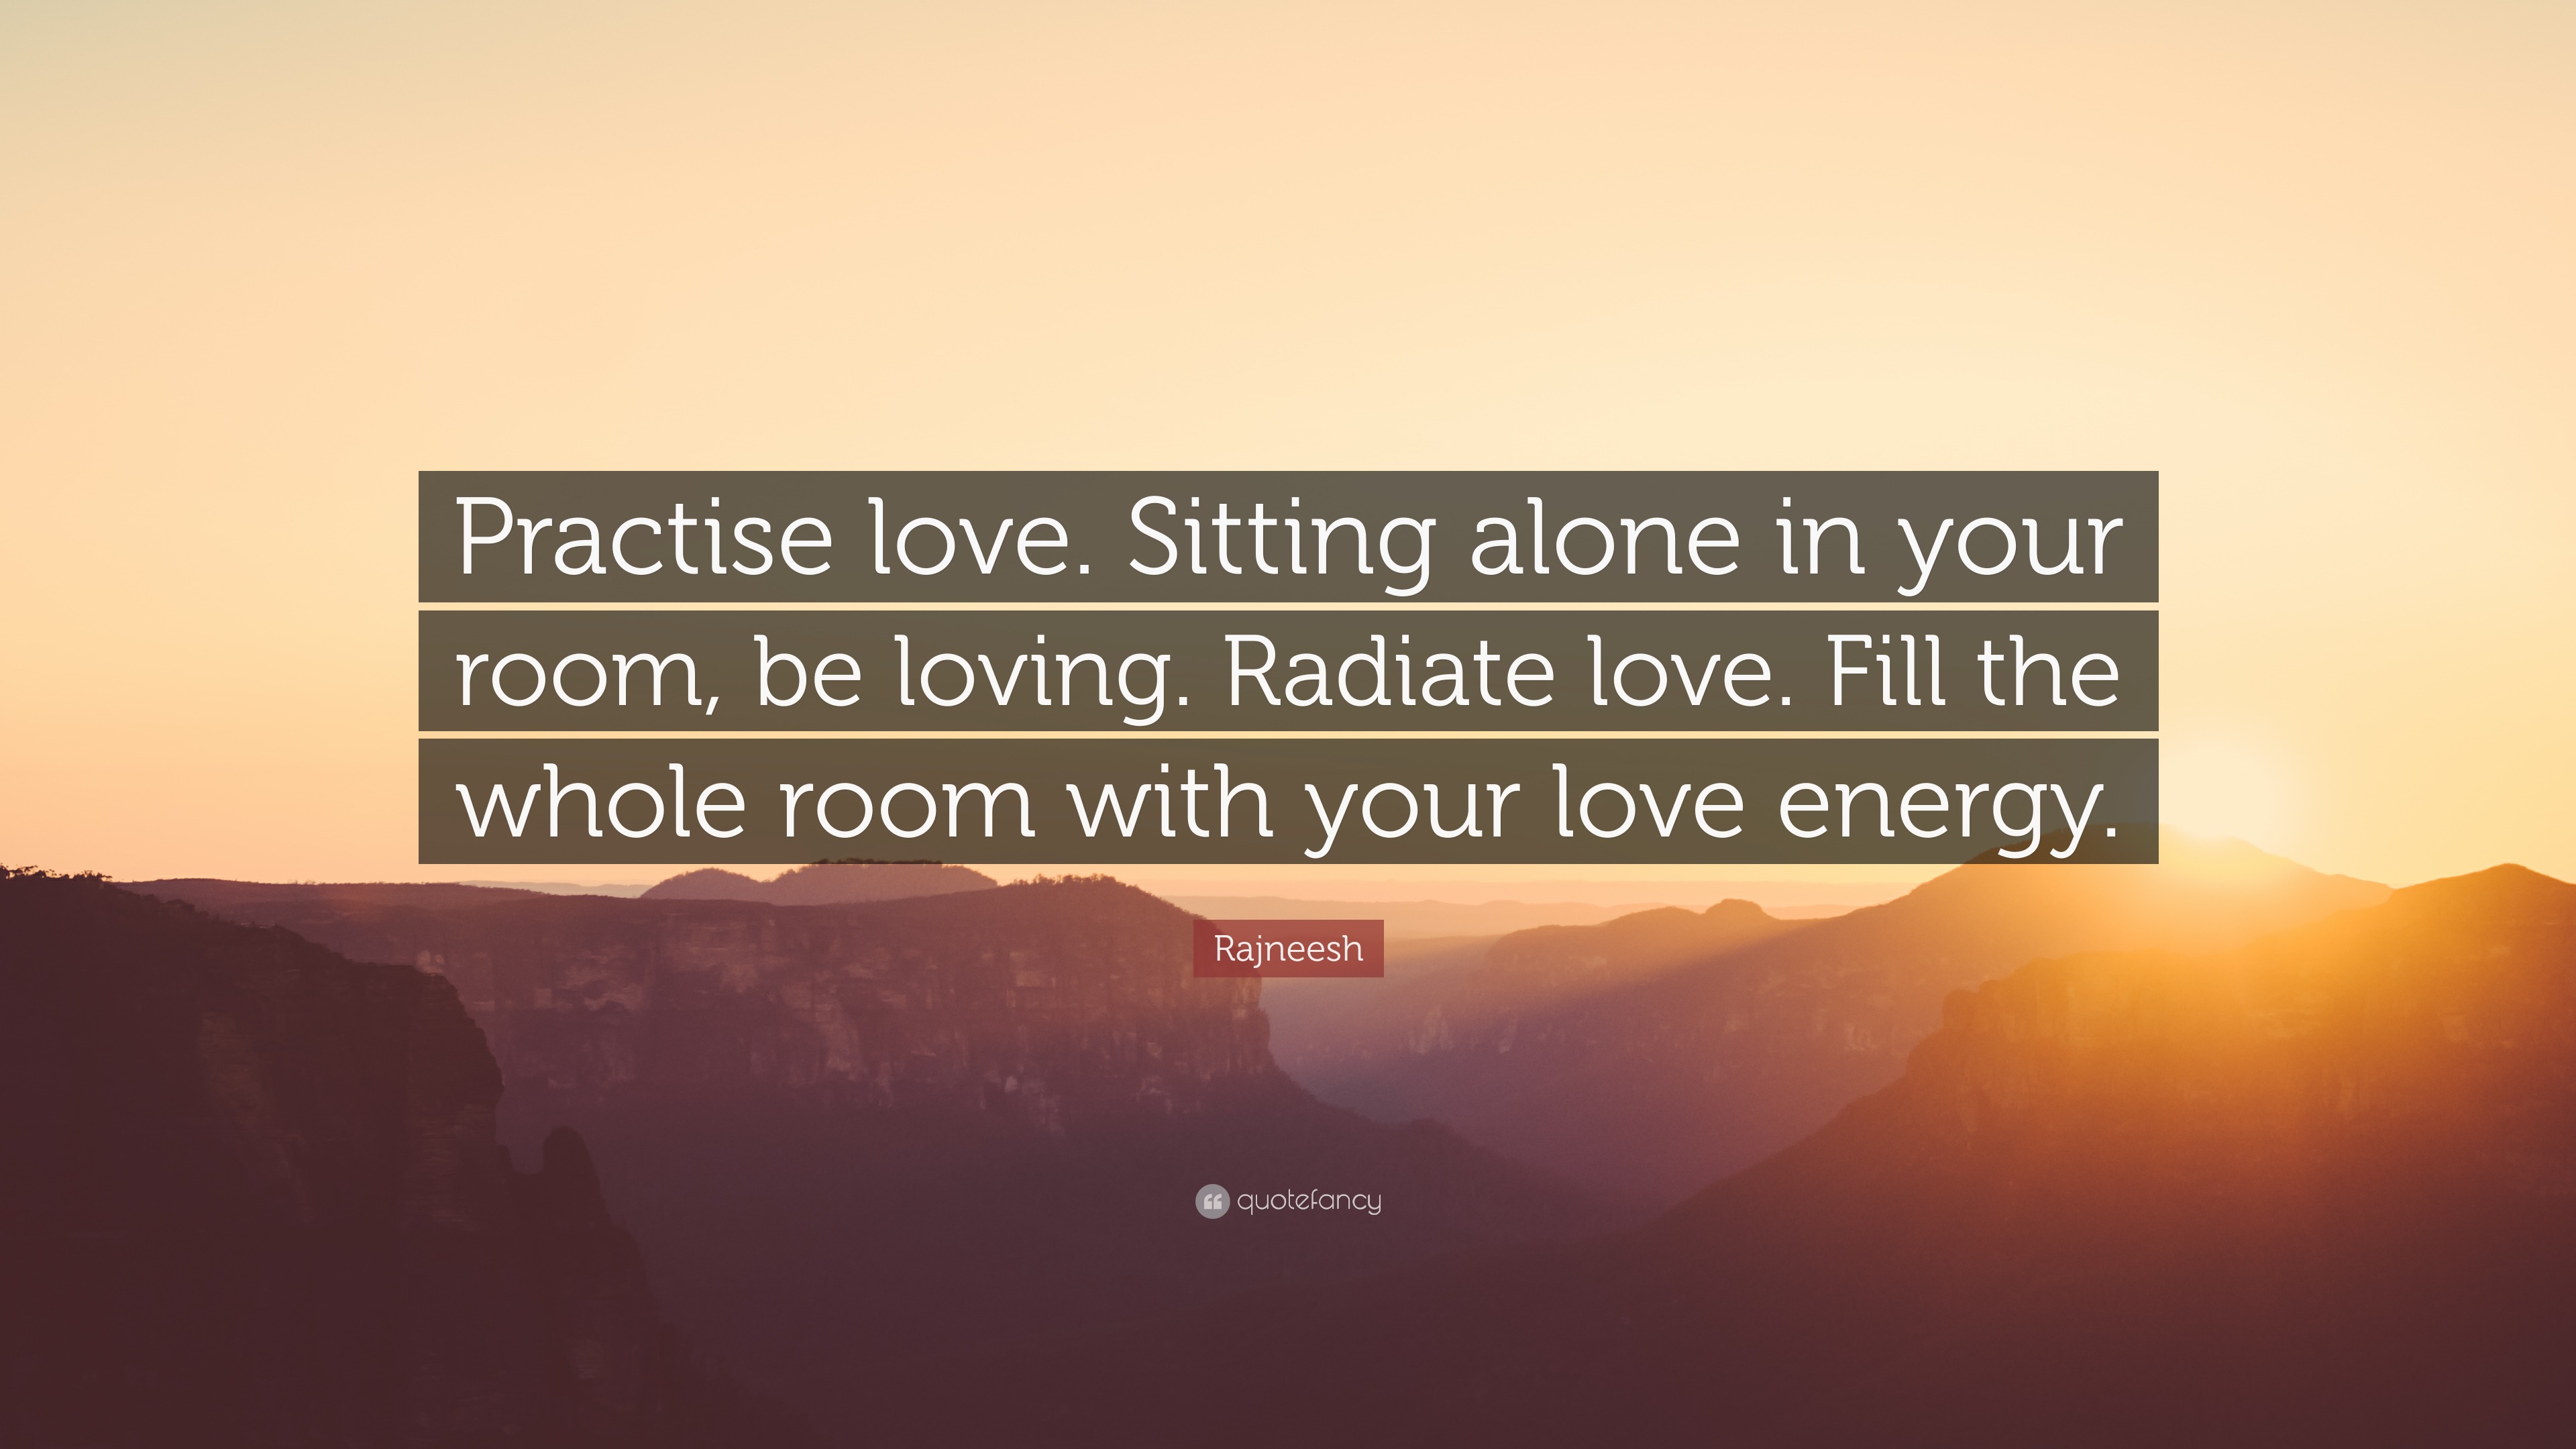 Rajneesh quote: Real love is not an escape from loneliness, real love